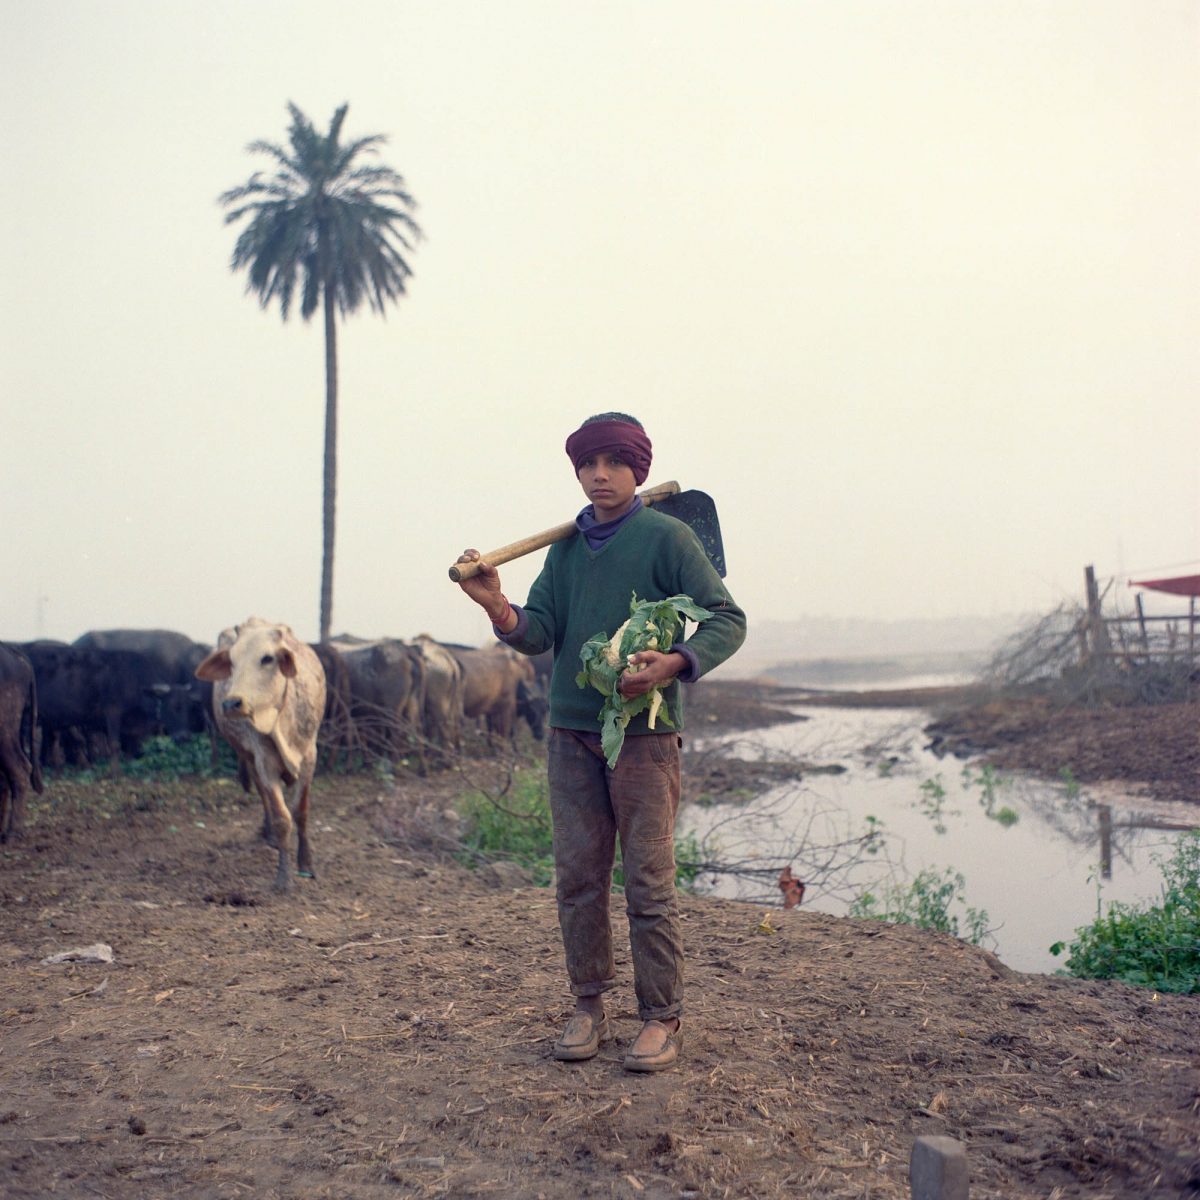 Lucas Barioulet, The Land of The Pure, OD Photo Prize, 2023 | Runner Up